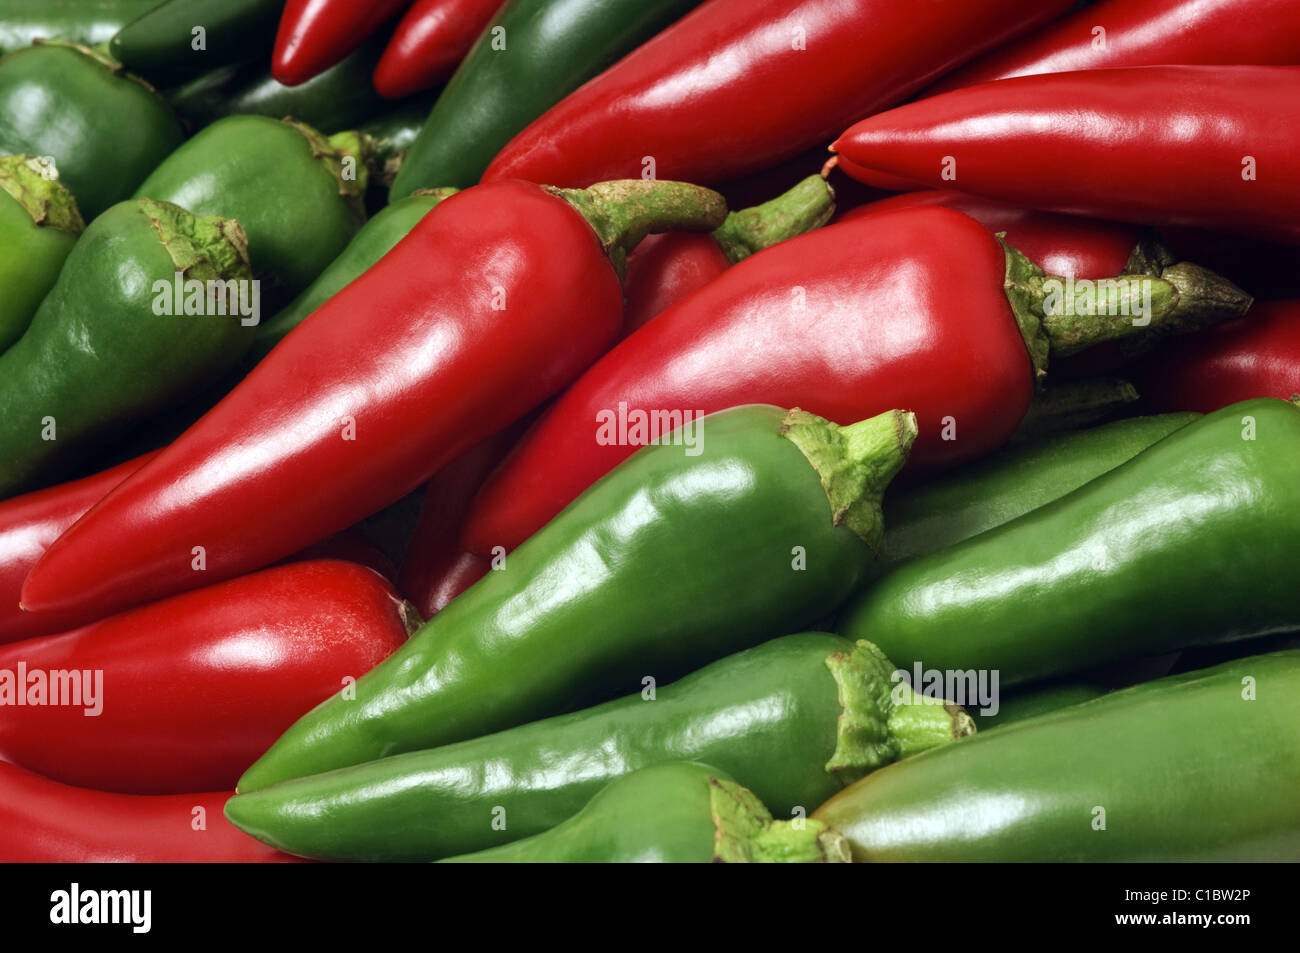 Jalapeno chilli peppers Stock Photo